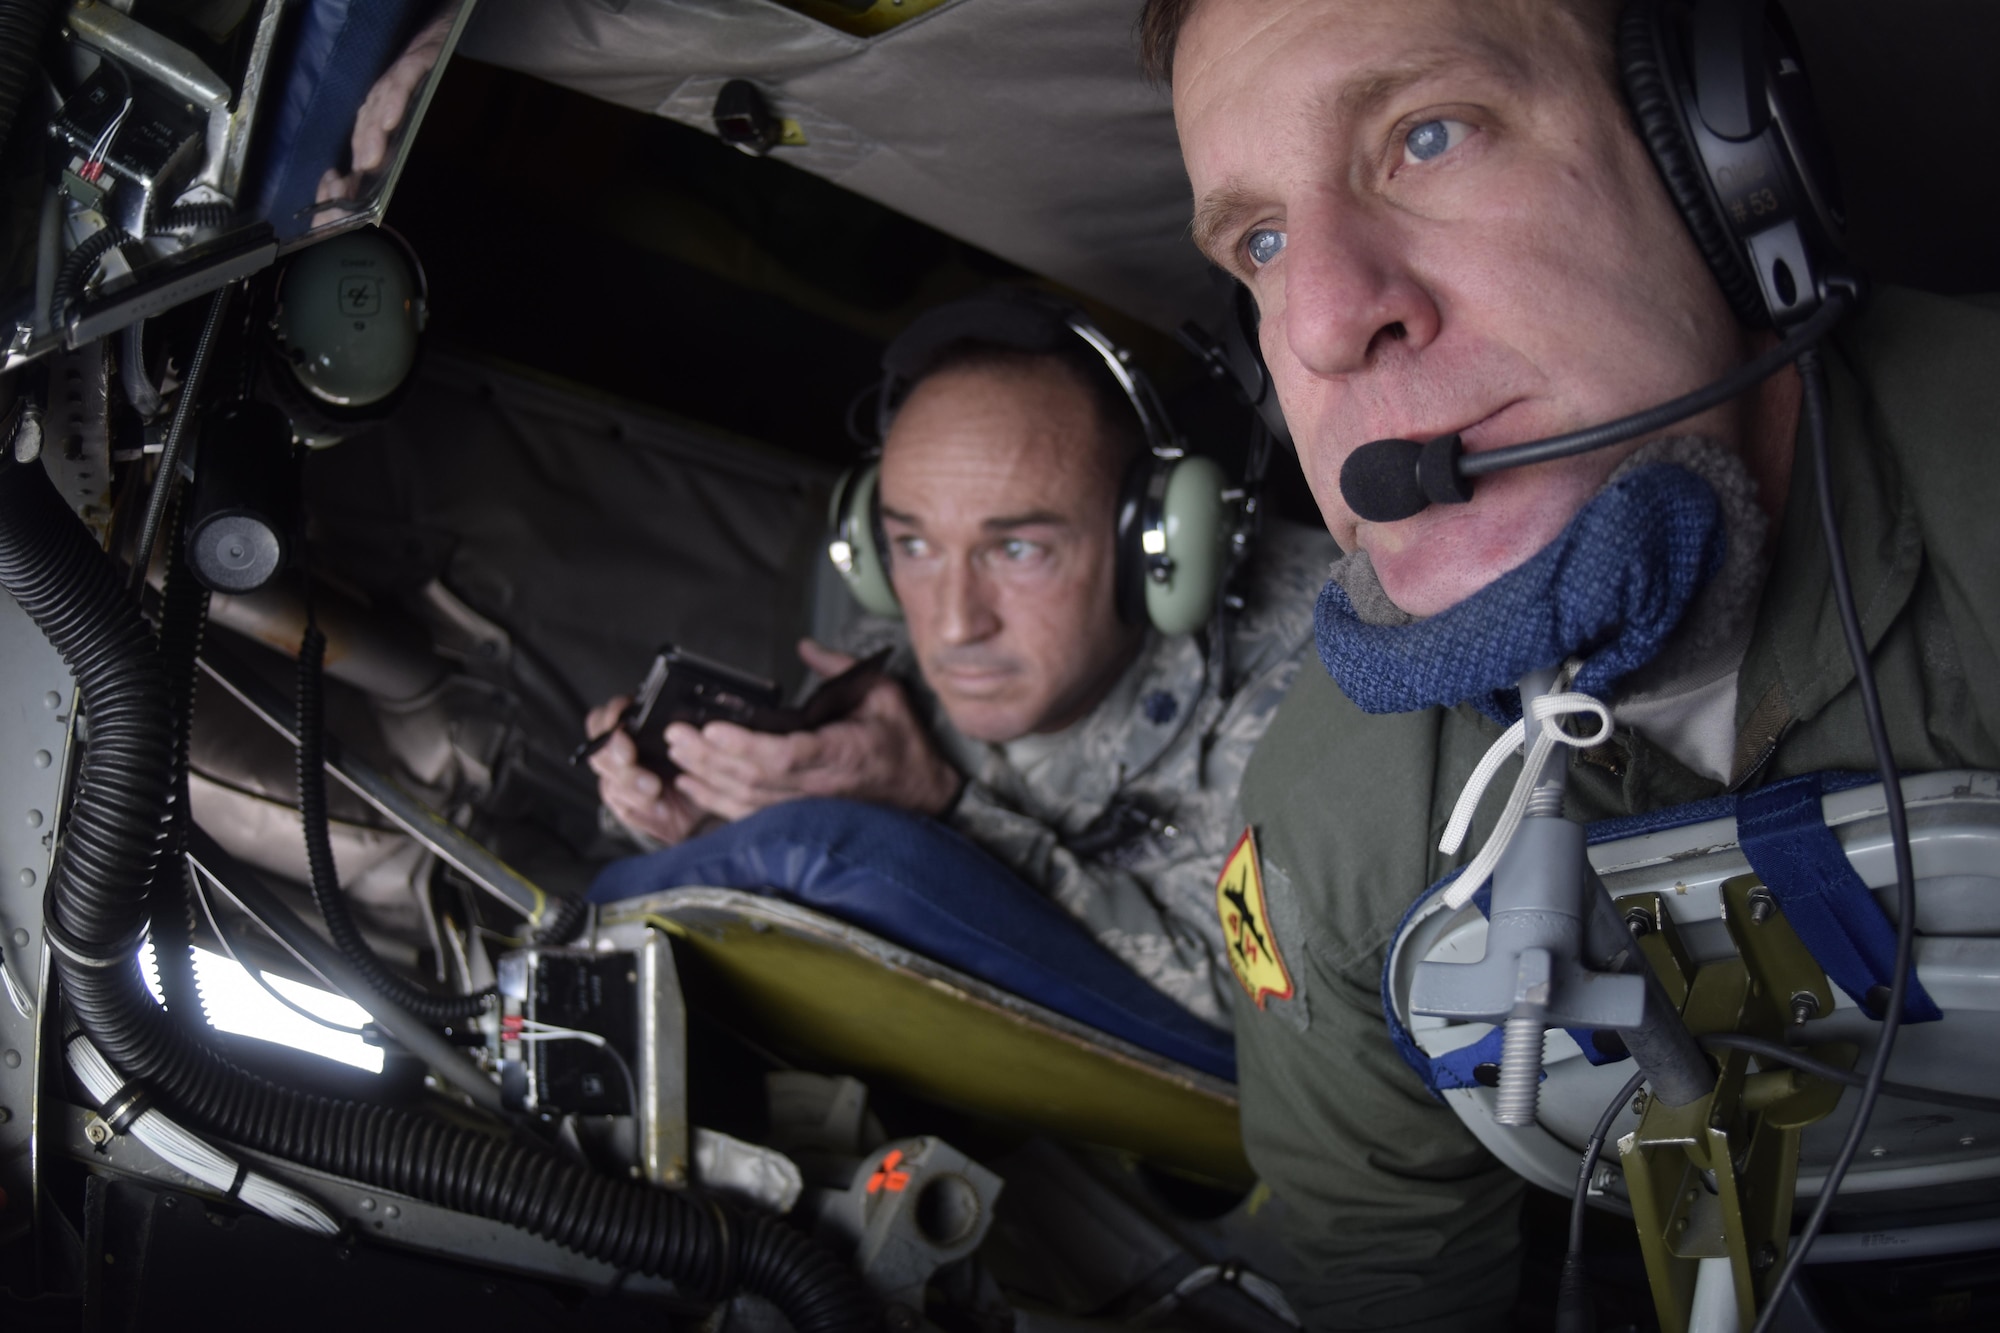 Master Sgt. Charles Danten, 465th Air Refueling Squadron, 507th Air Refueling Wing, Air Force Reserve Command, looks down on F-16s during a air refueling mission while Lt. Col. Lance Winner, 513th Air Control Group deputy commander, watches the action in the background April 6, 2017, from Tinker Air Force Base, Oklahoma. The 507th ARW conducted a local training flight with members of the Tinker Air Force Base Honorary Commander's 2017 Class to learn about the KC-135R Stratotanker's mission during an air refueling mission with F-16s of the 138th Fighter Wing, Oklahoma Air National Guard. (U.S. Air Force photo/Greg L. Davis)